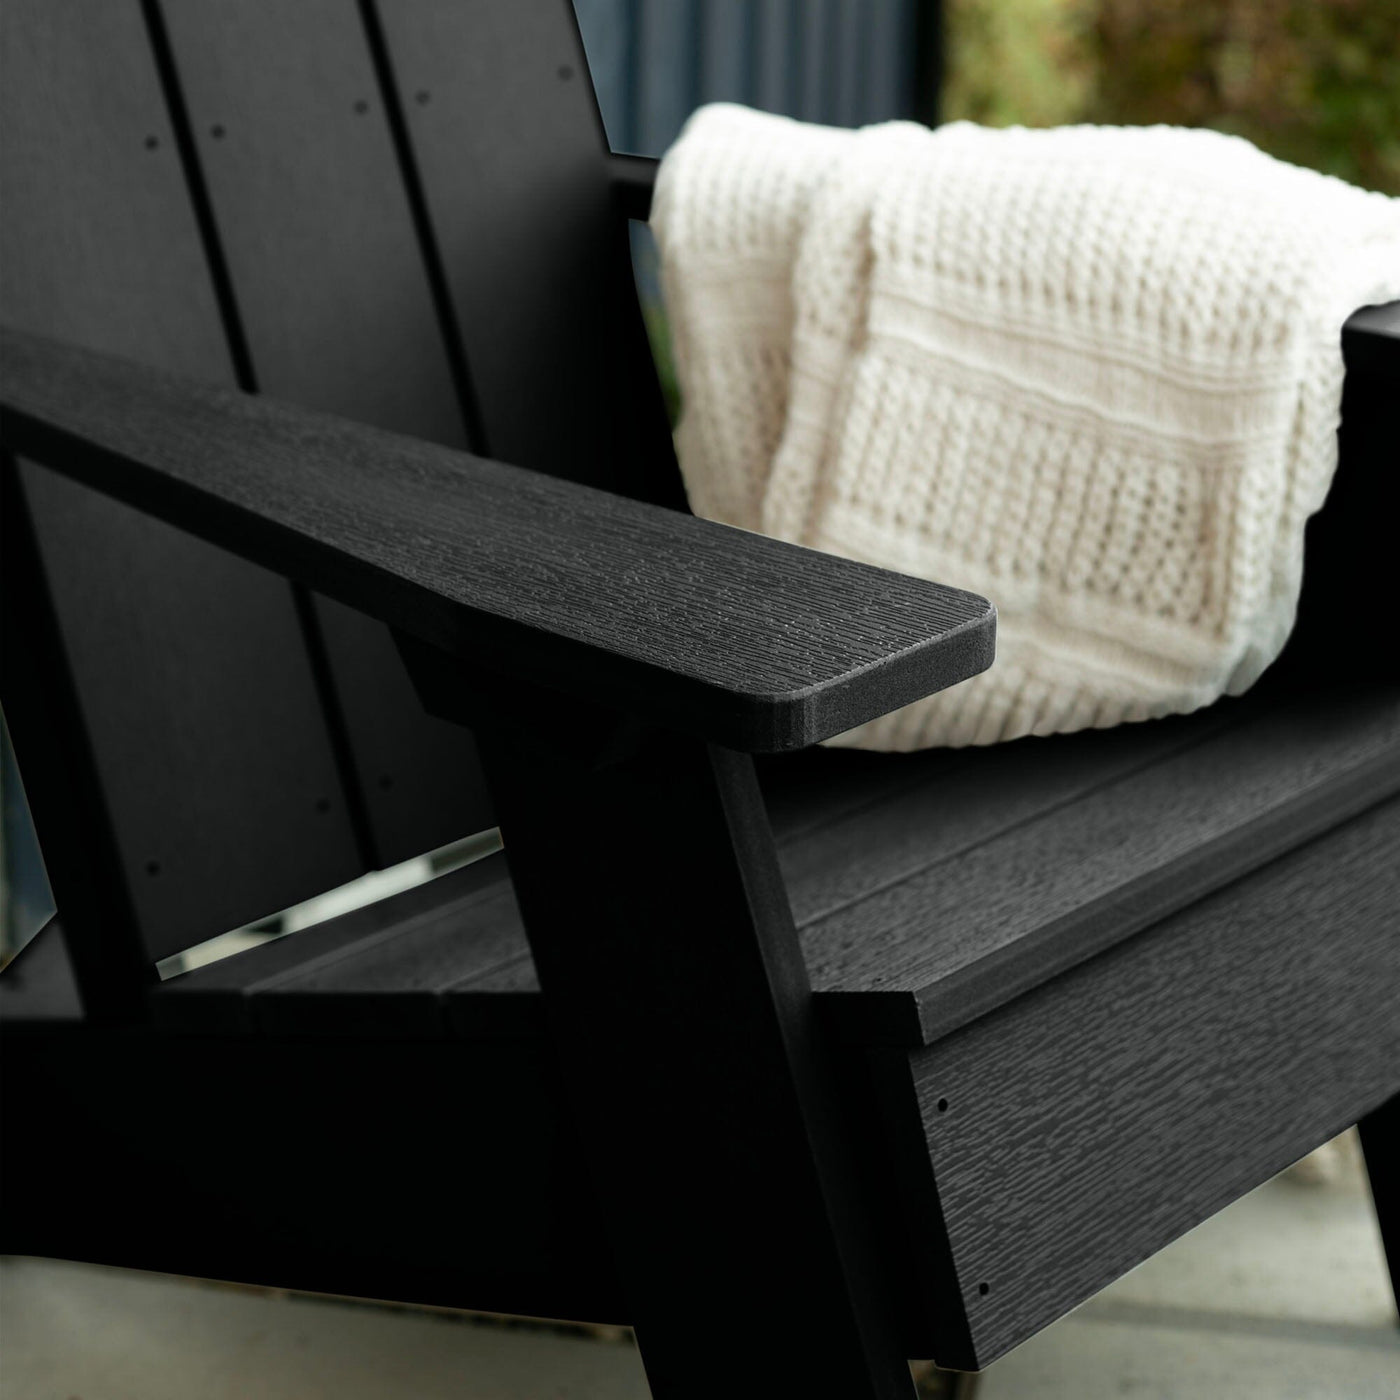 Close up of Black Italica Modern Adirondack Chair with blanket